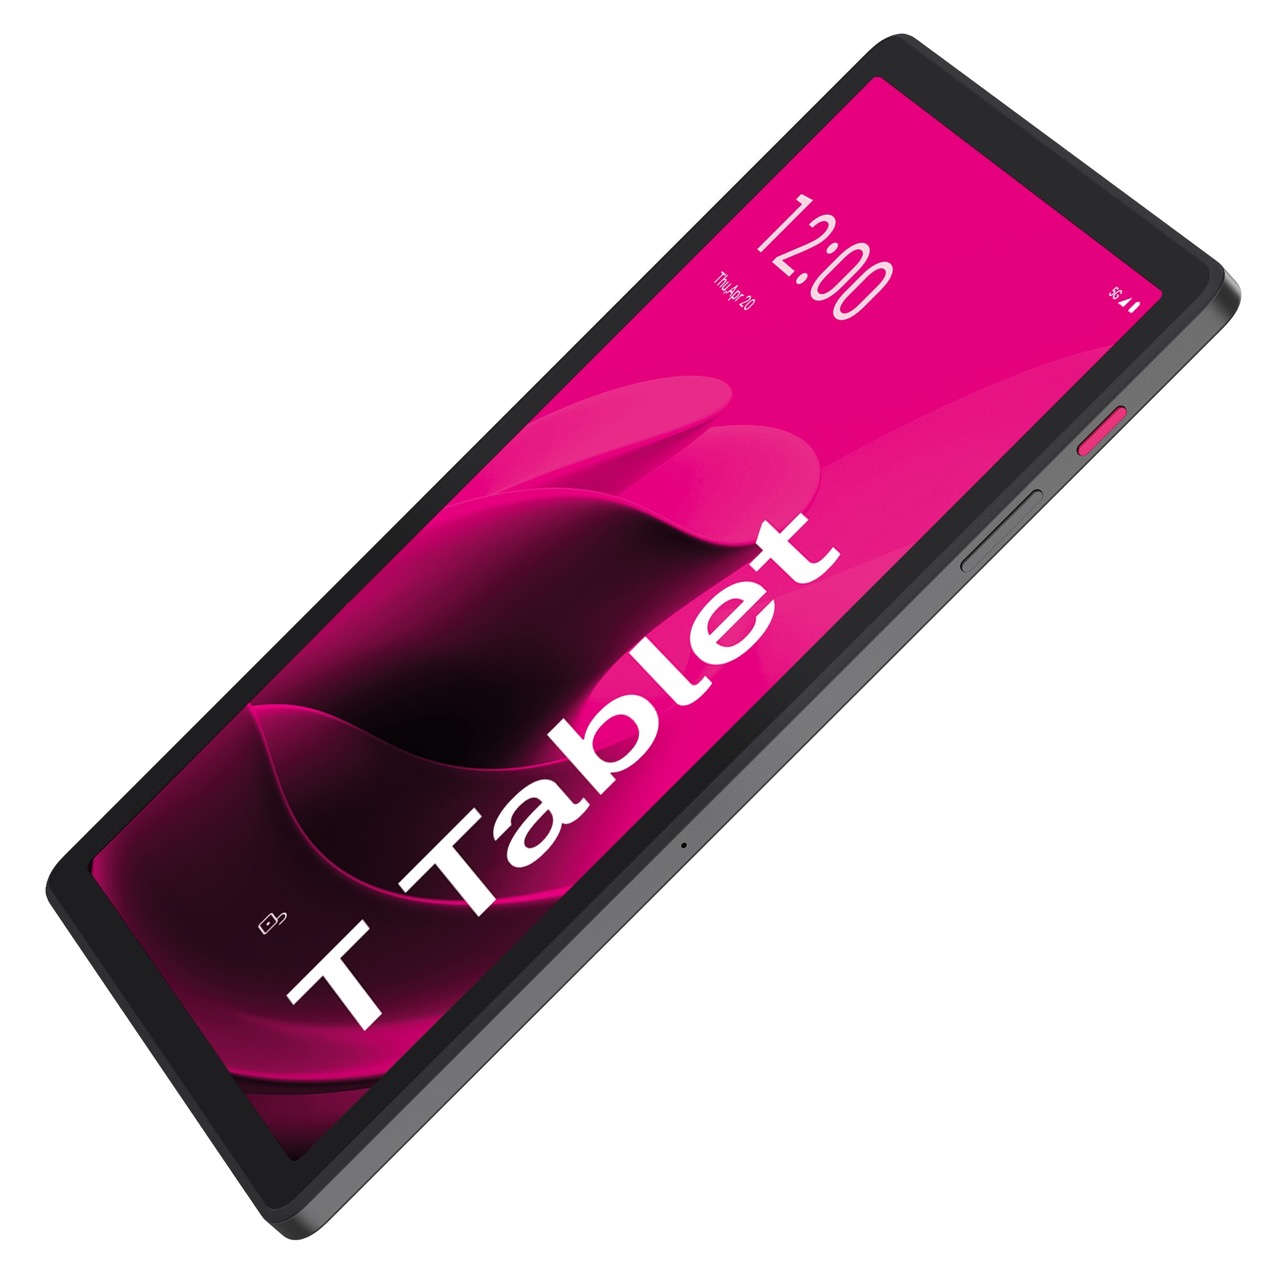 T Tablet